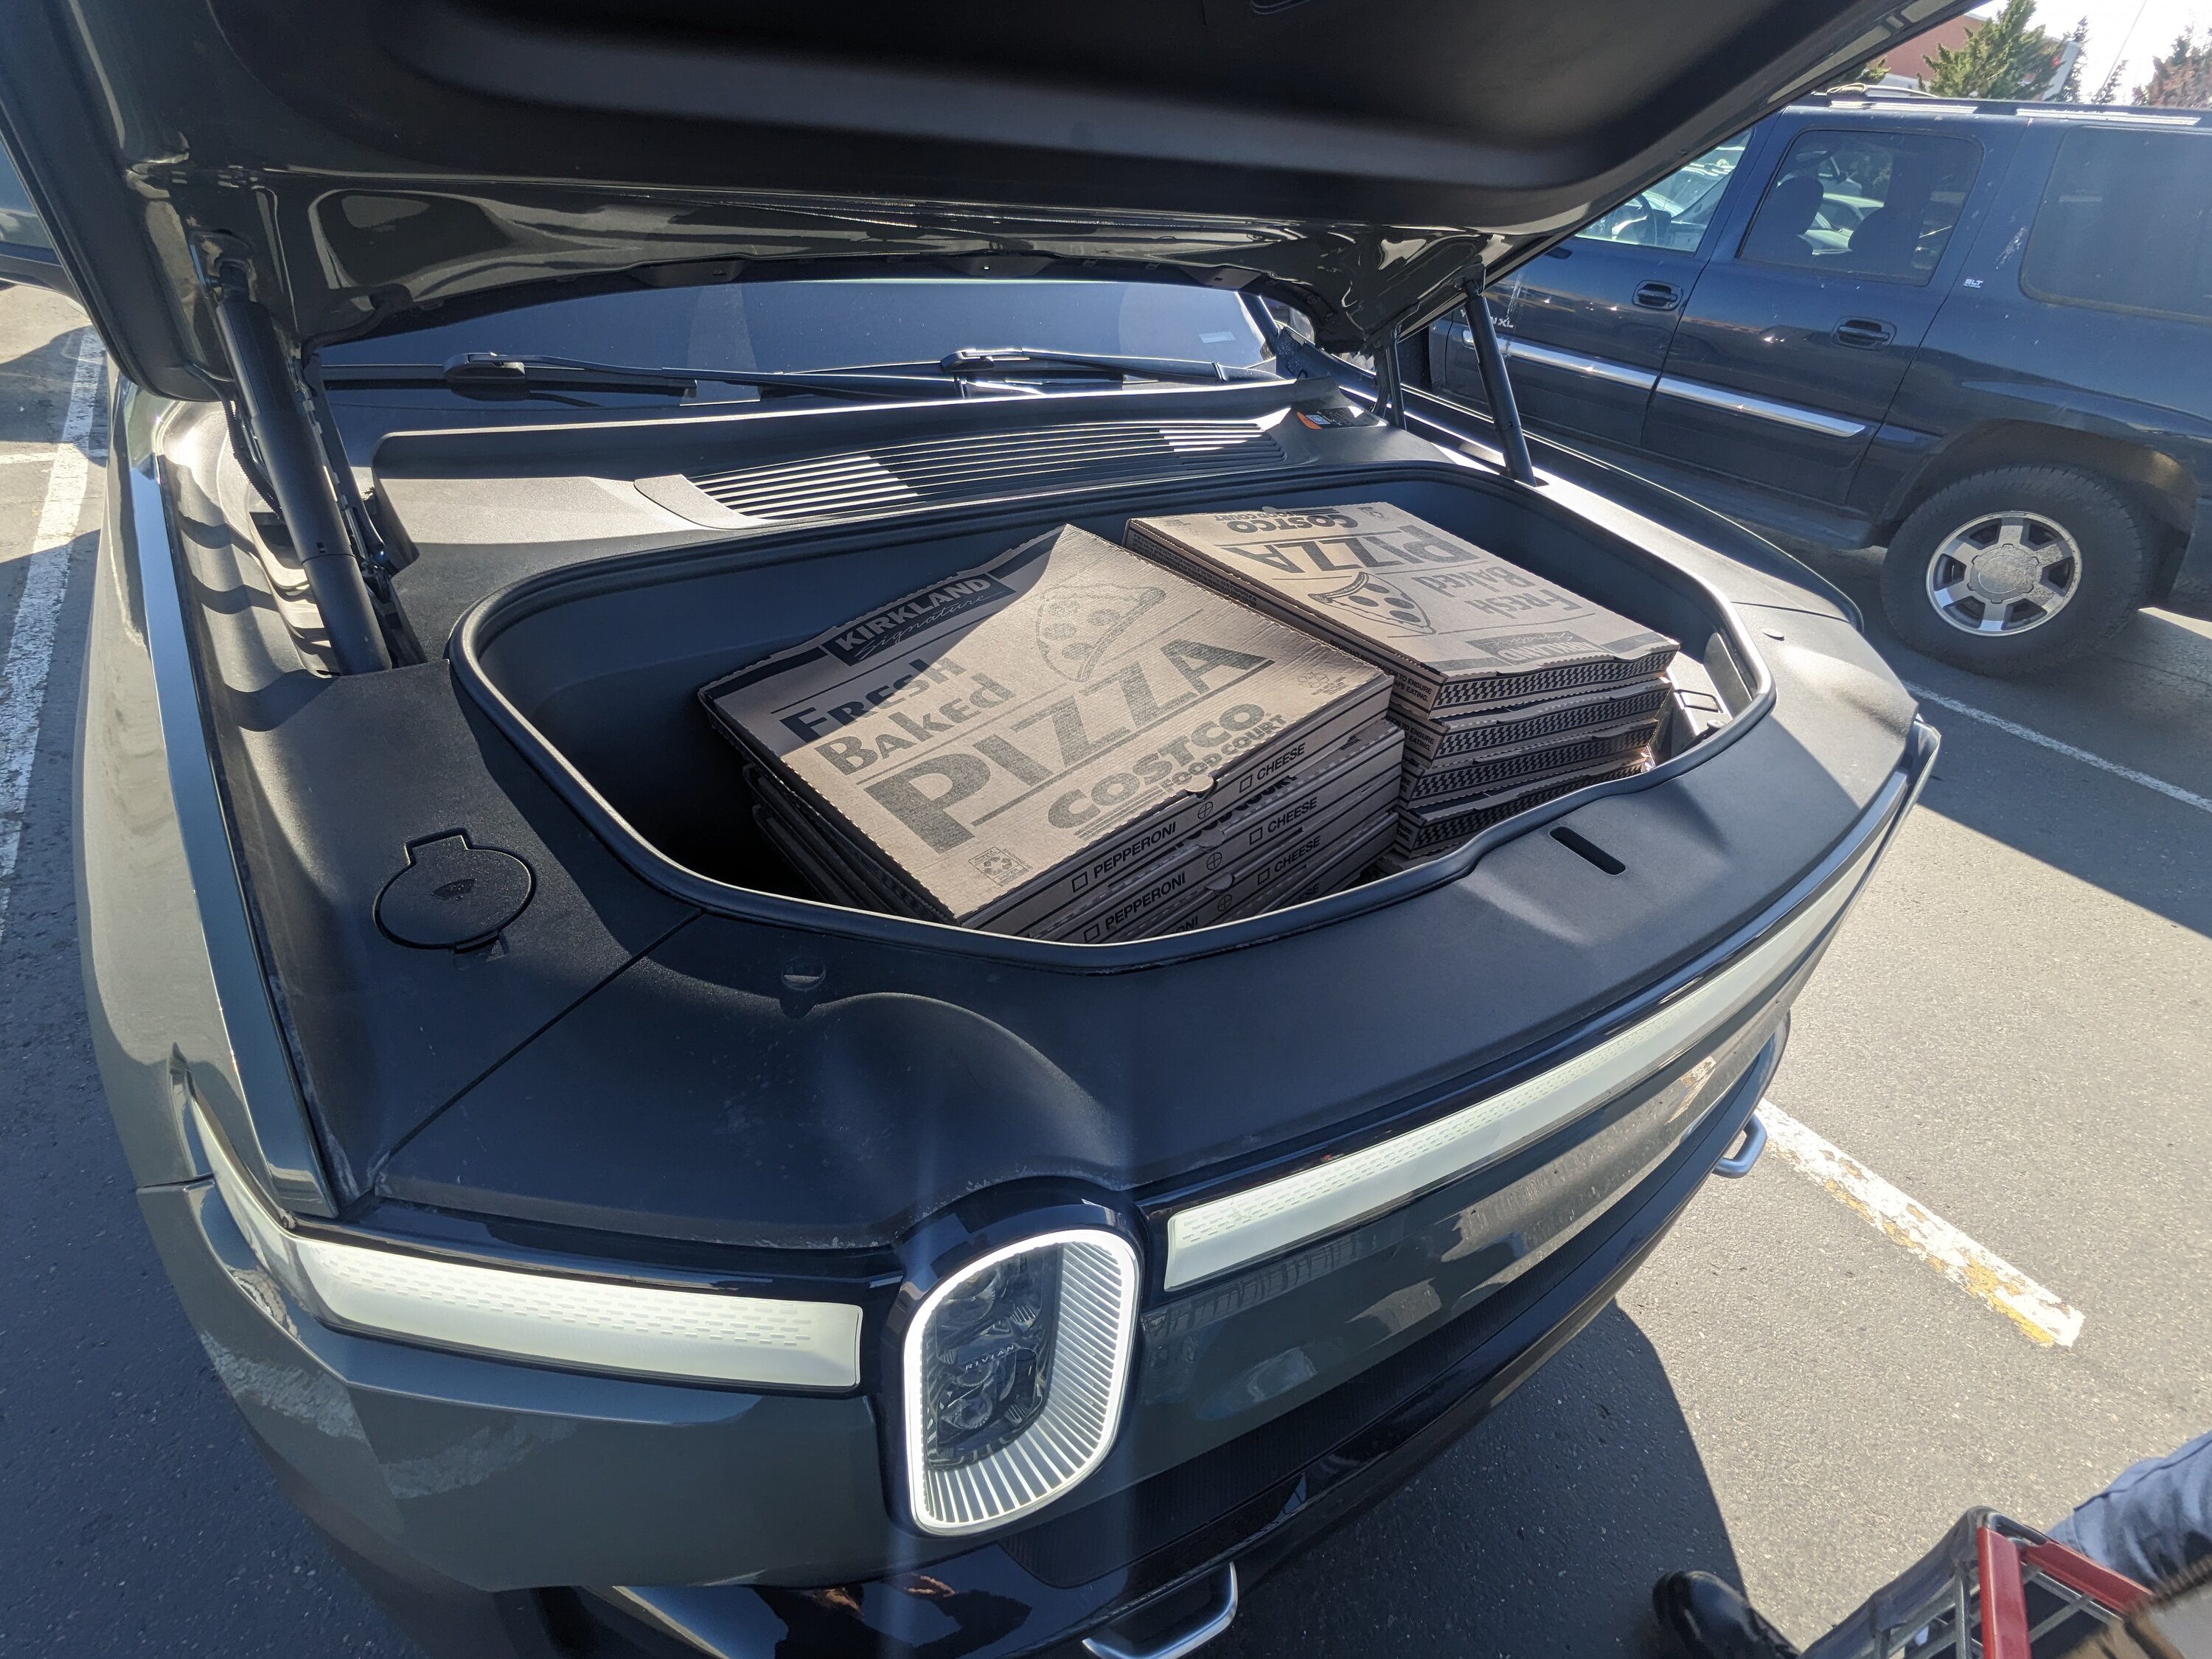 Car camping with induction stove and espresso machine is pretty sweet   Rivian Forum - R1T R1S R2 News, Specs, Models, RIVN Stock 